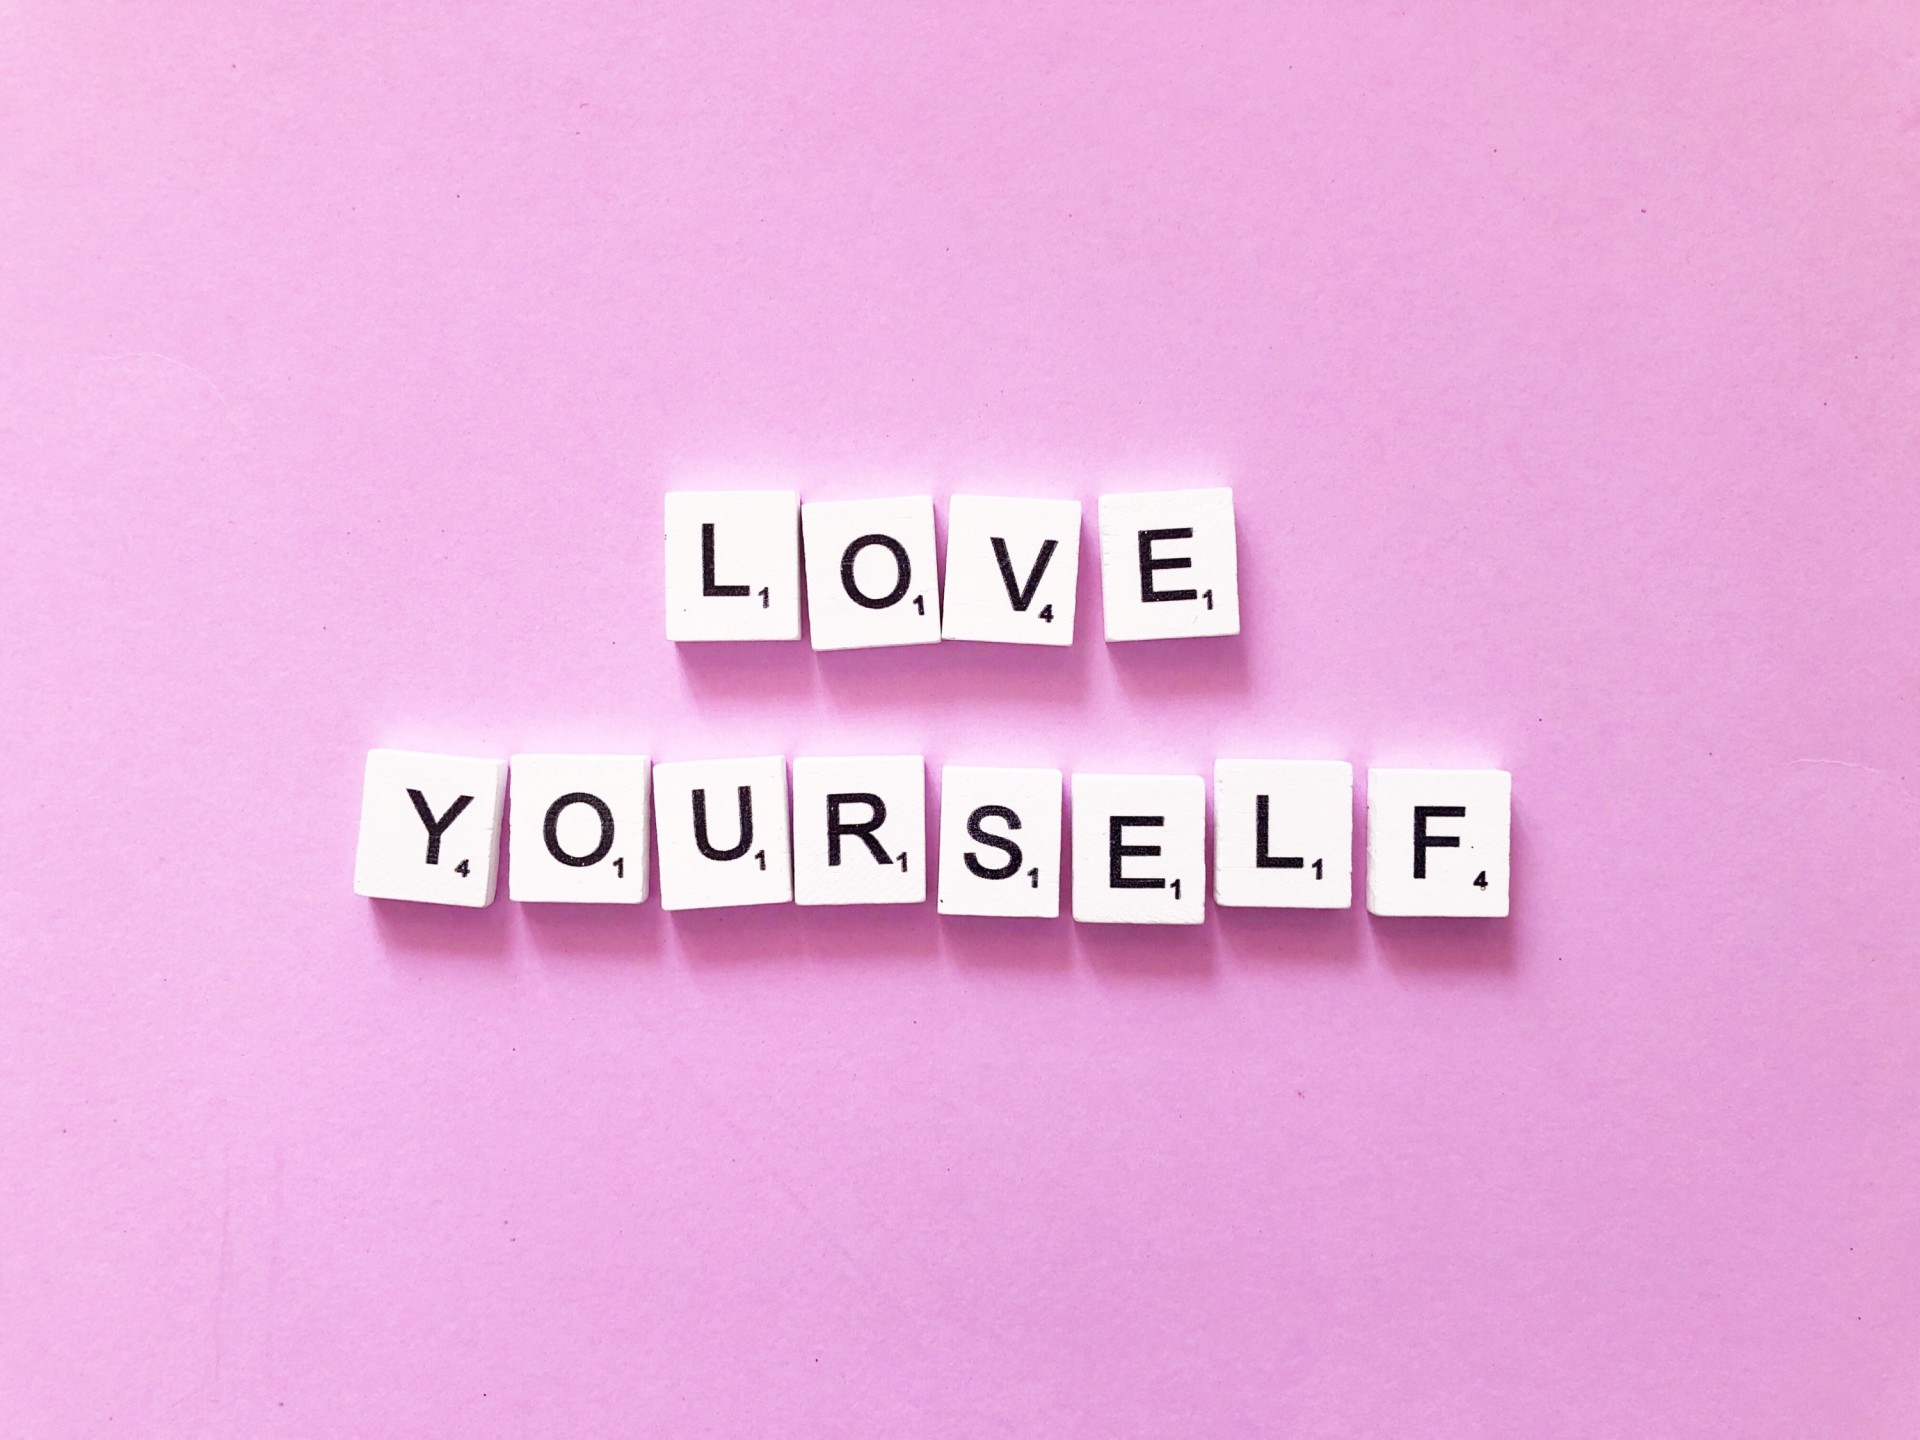 Love Yourself First. Then Spread Love.